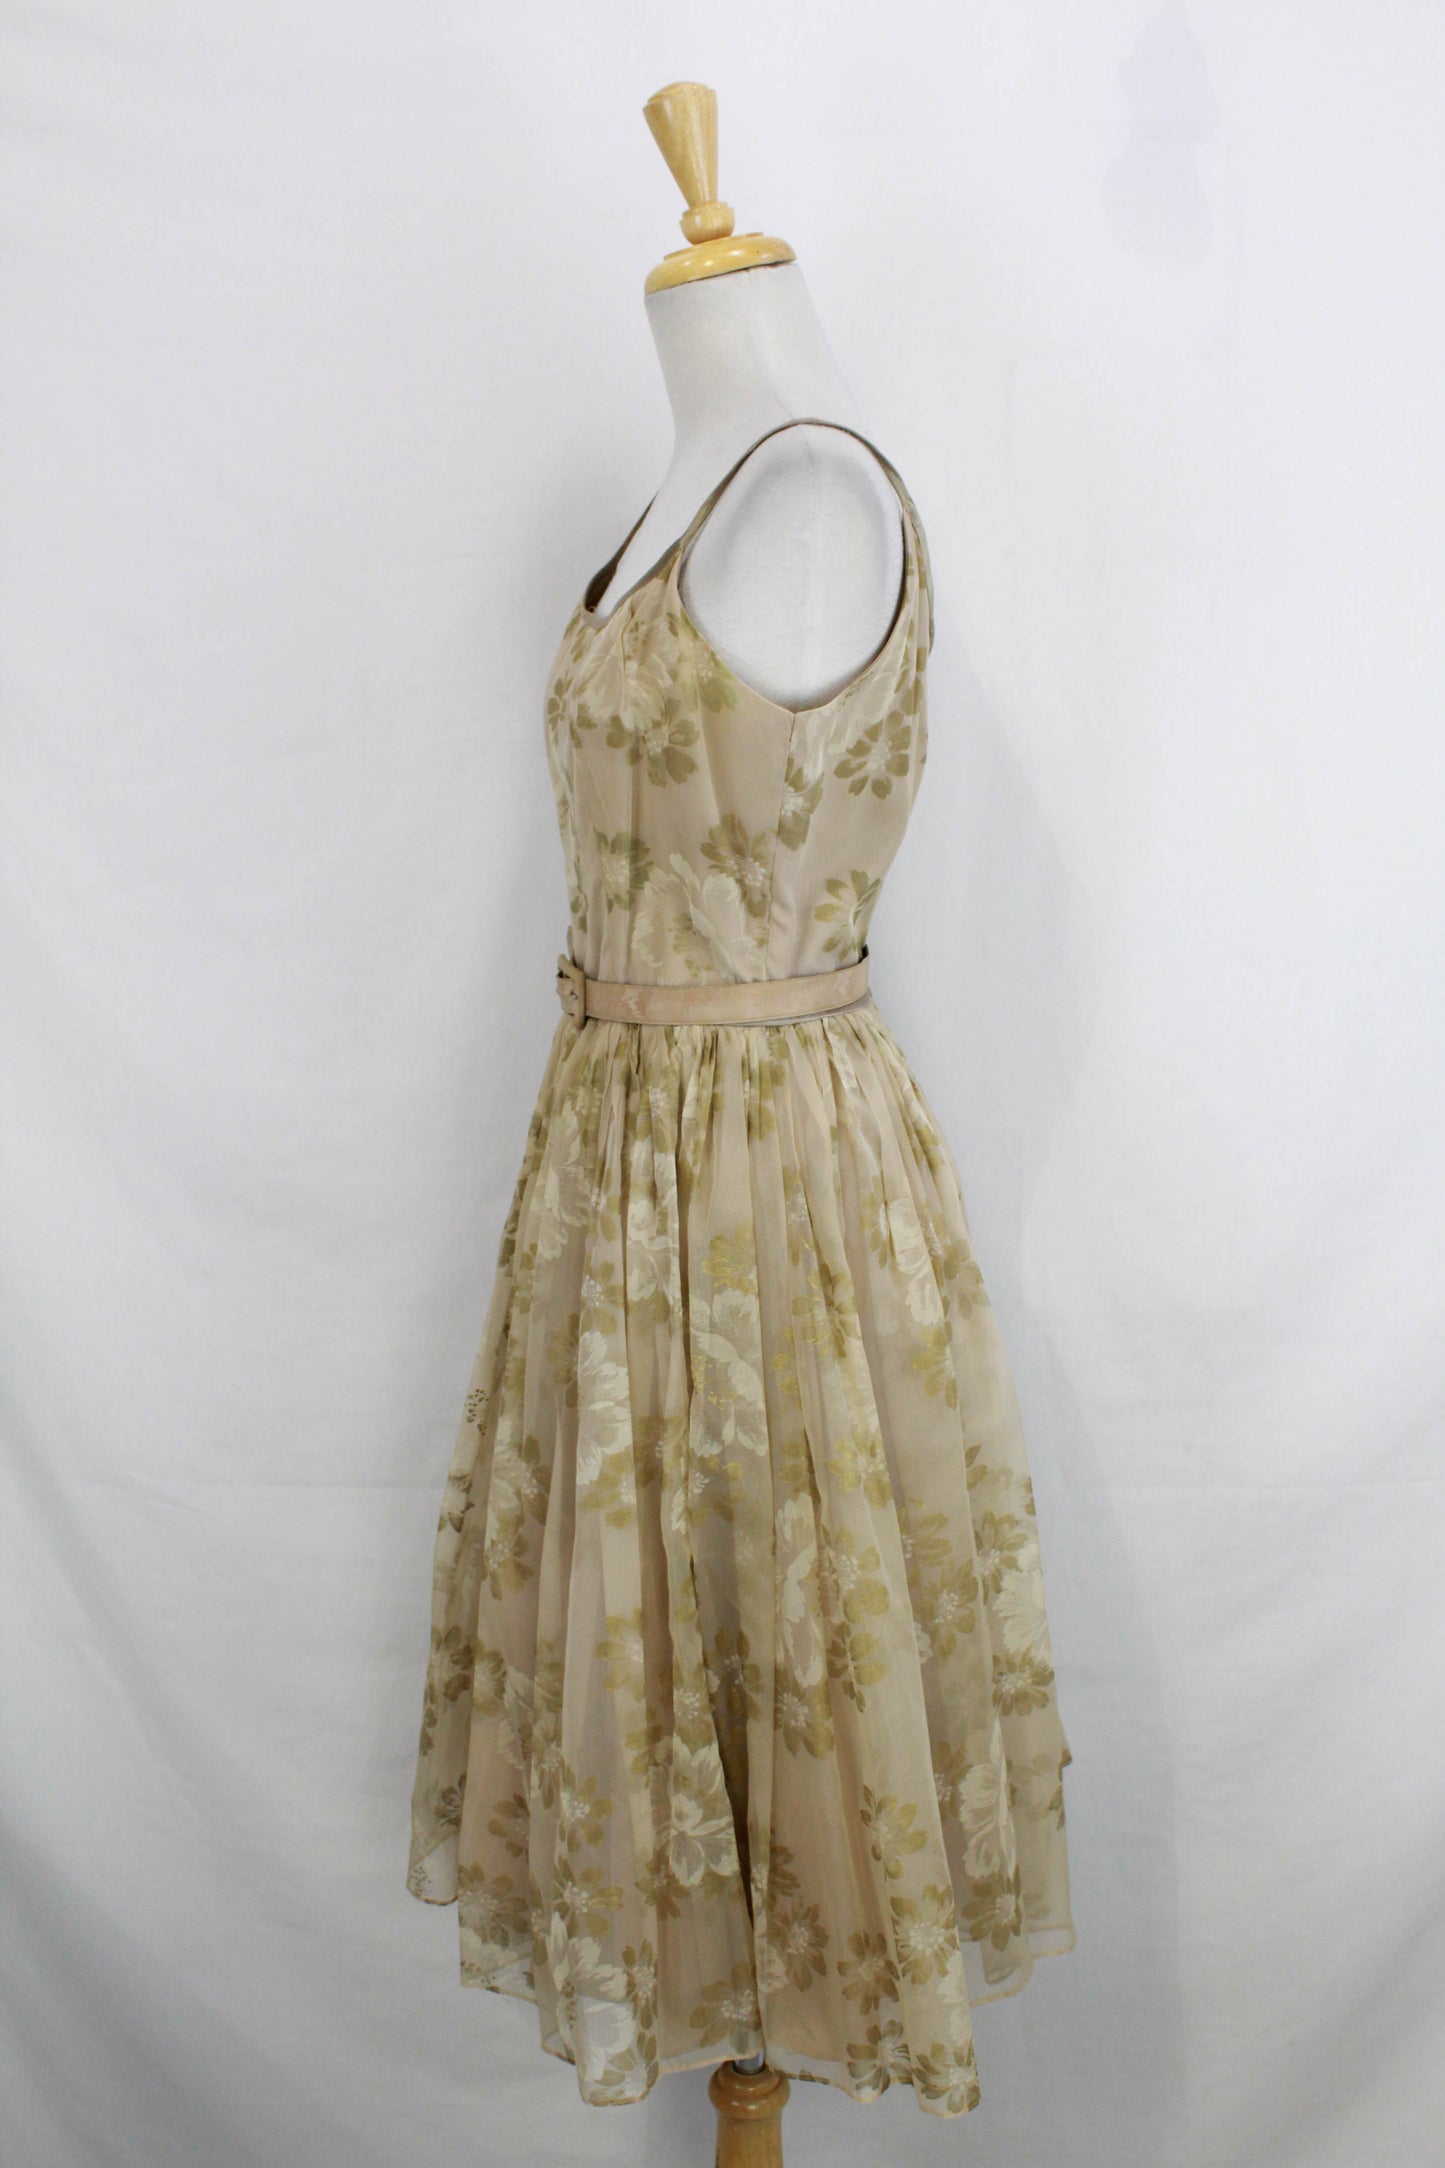 1950s Taupe Floral Print Chiffon Party Dress, Full Skirt Gathered with Matching Belt, Spaghetti Straps, Vintage 50s Womens Fit and Flare, True Vintage, Ian Drummond Vintage